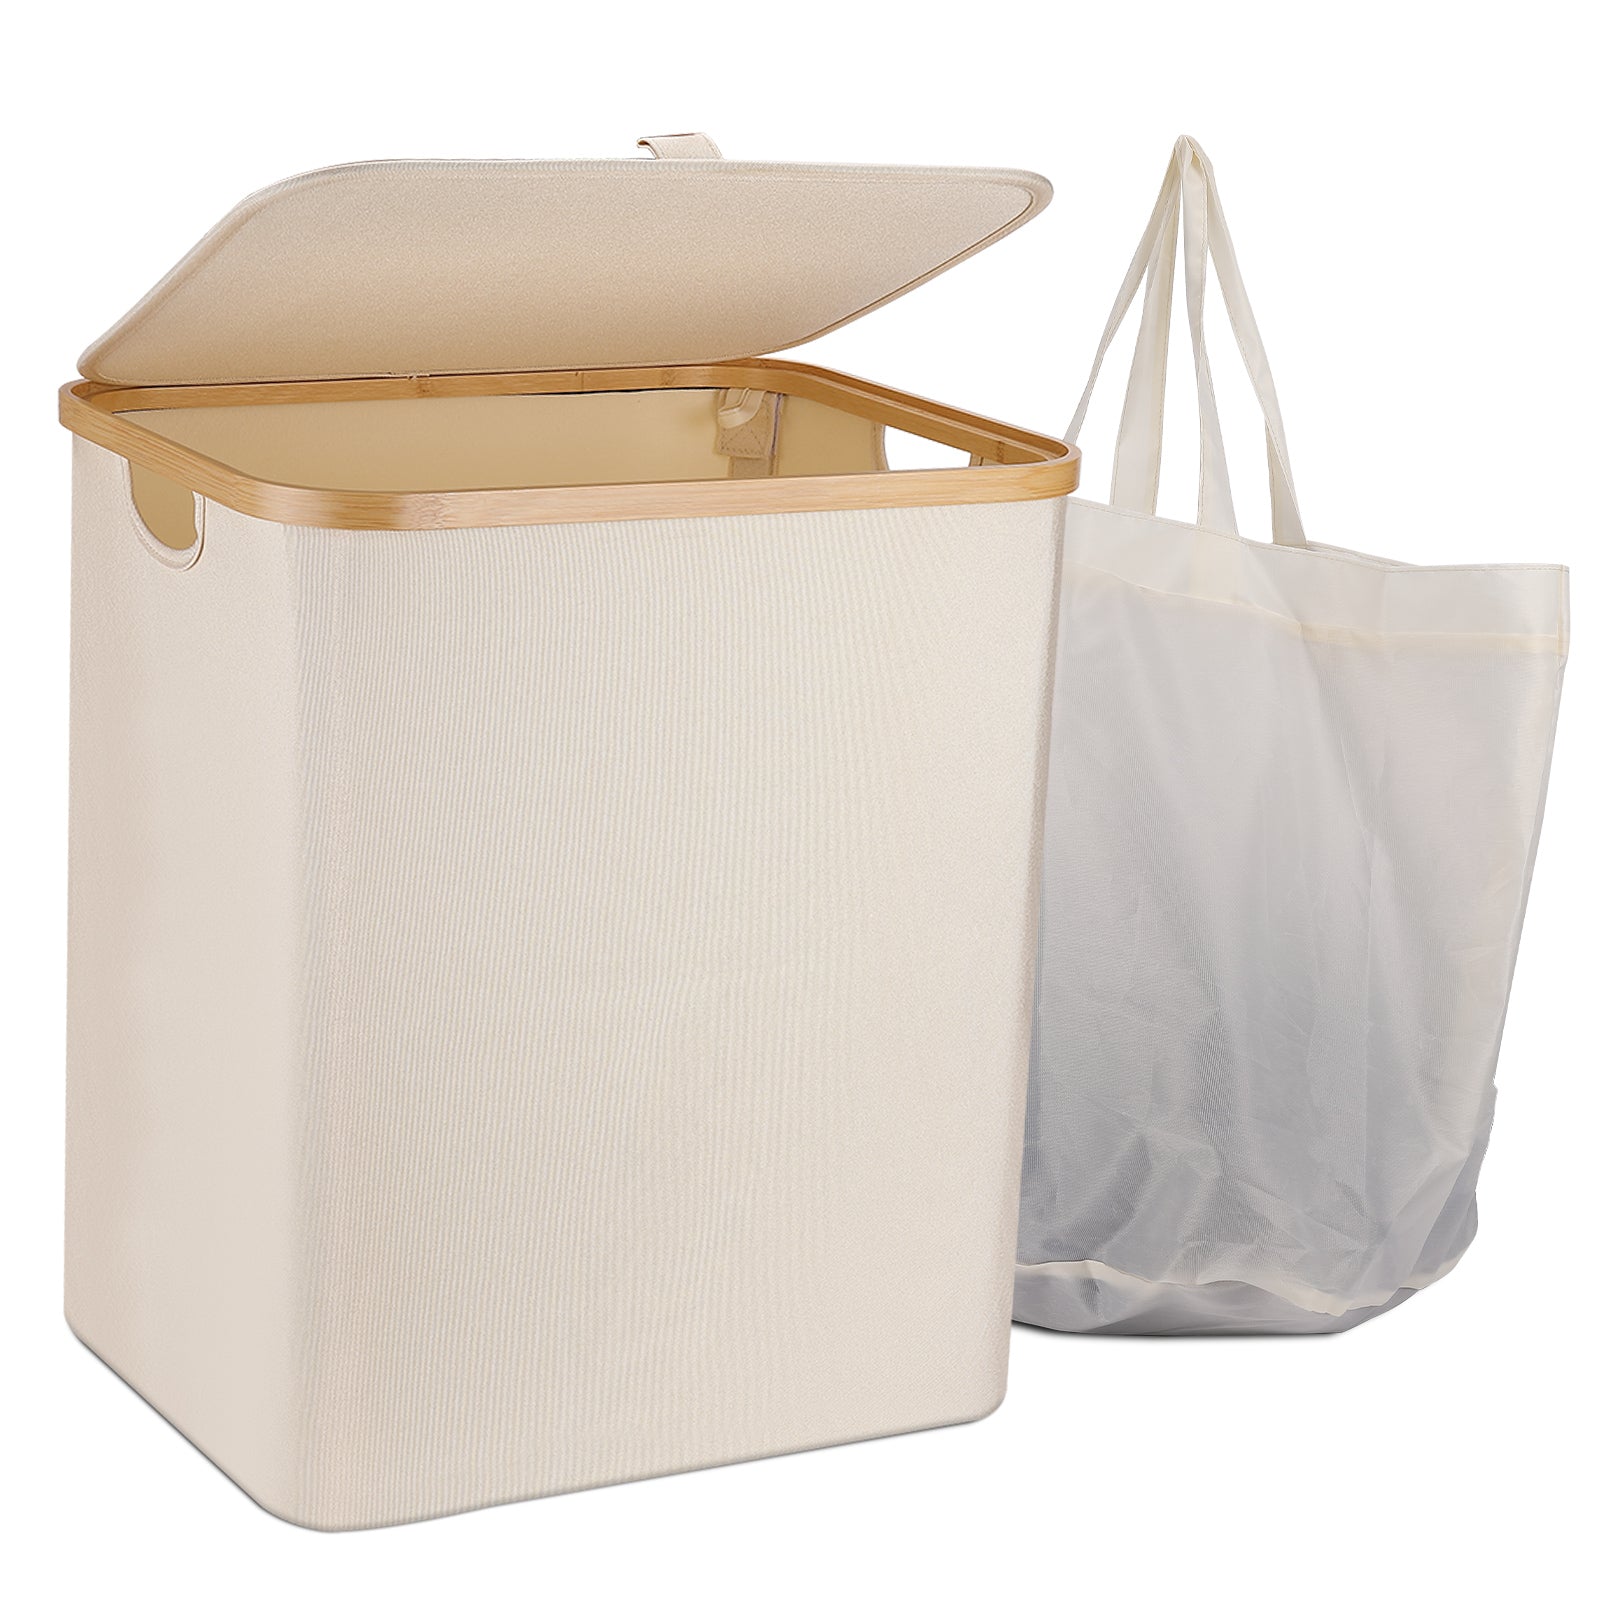 Laundry Basket with Lid 60L Collapsible Laundry Hamper with